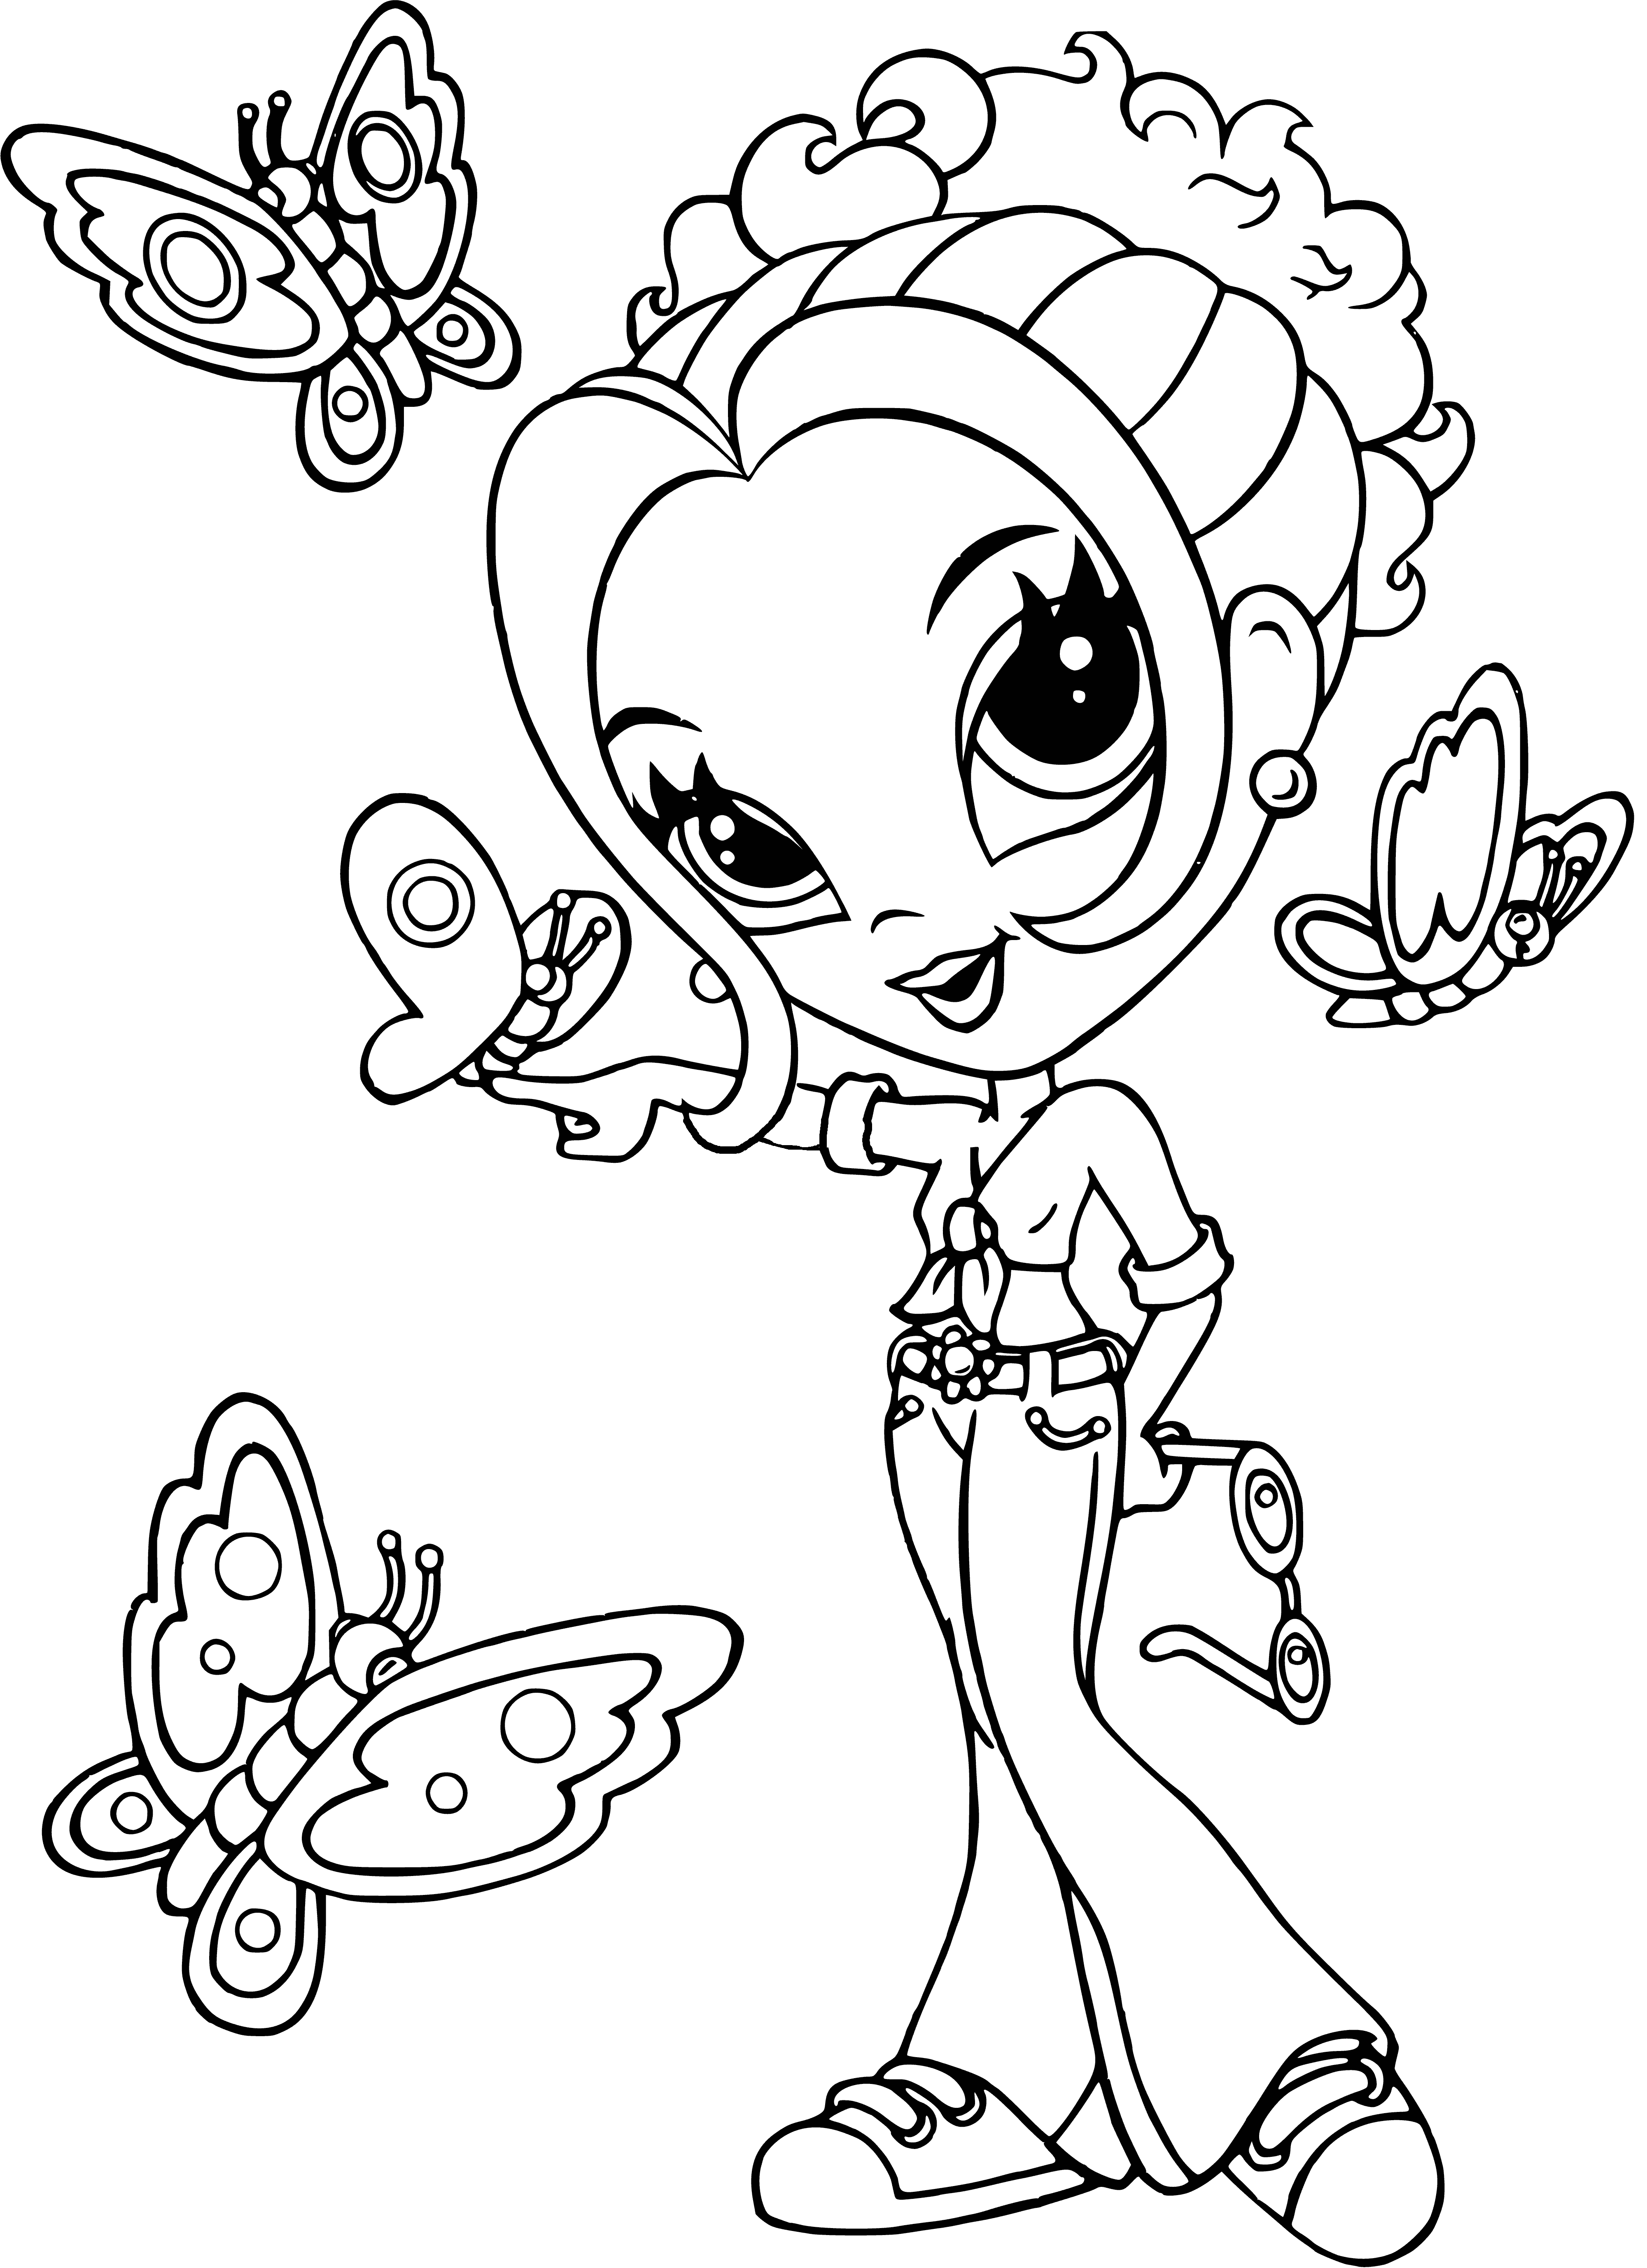 coloring page: Girl with long, blonde hair wearing pink dress with pink flower in her hair, smiling at the camera.